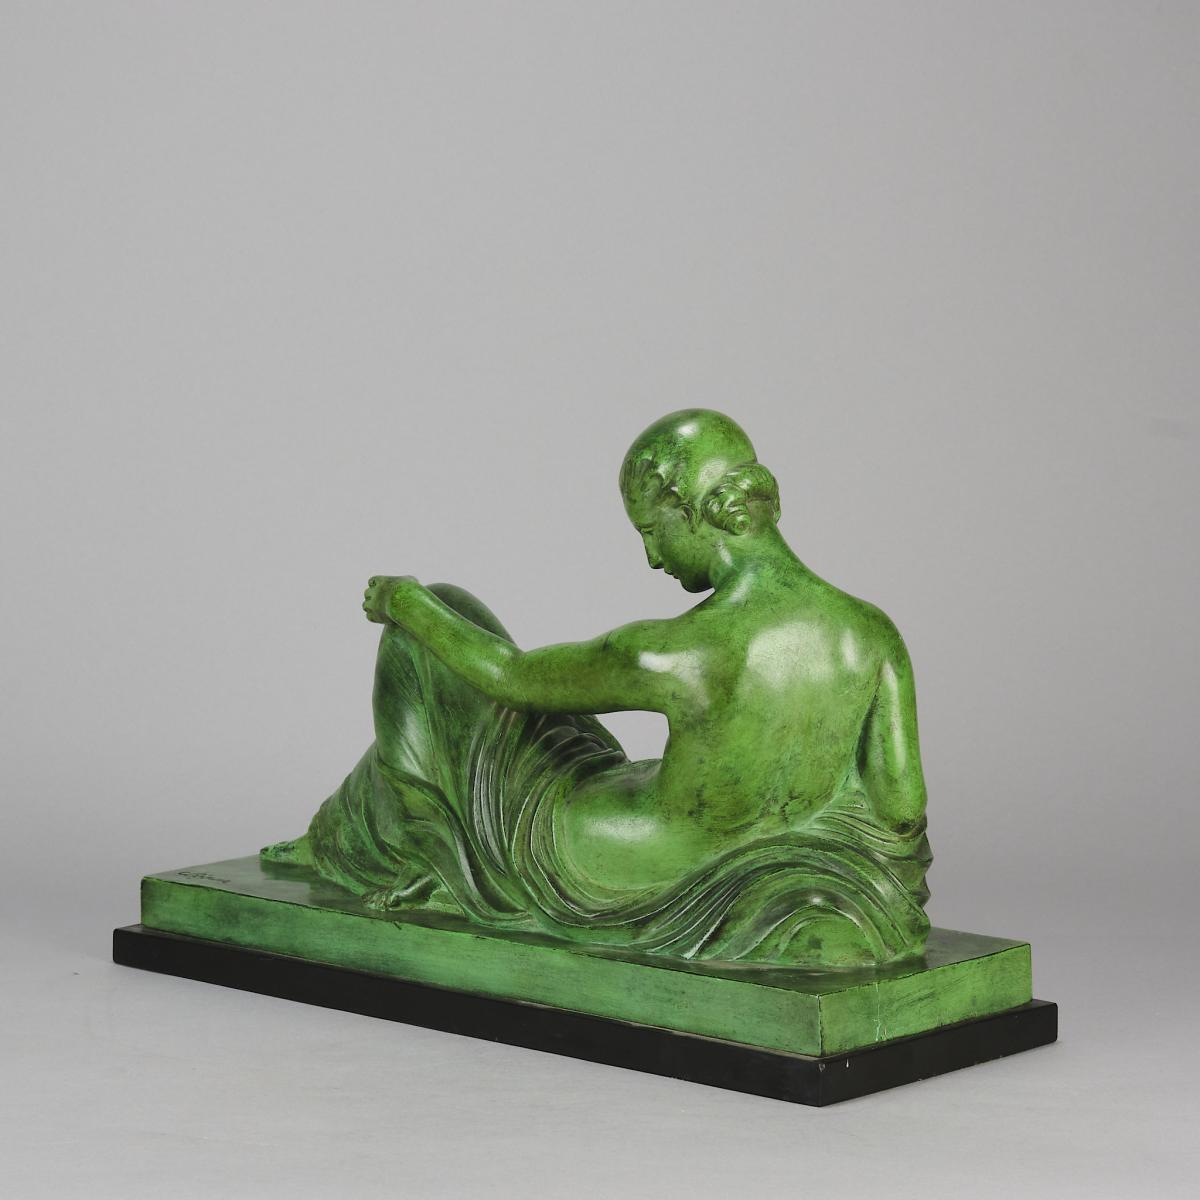 Early 20th Century Patinated Bronze entitled "Femme Allongée" by Gaston Béguin